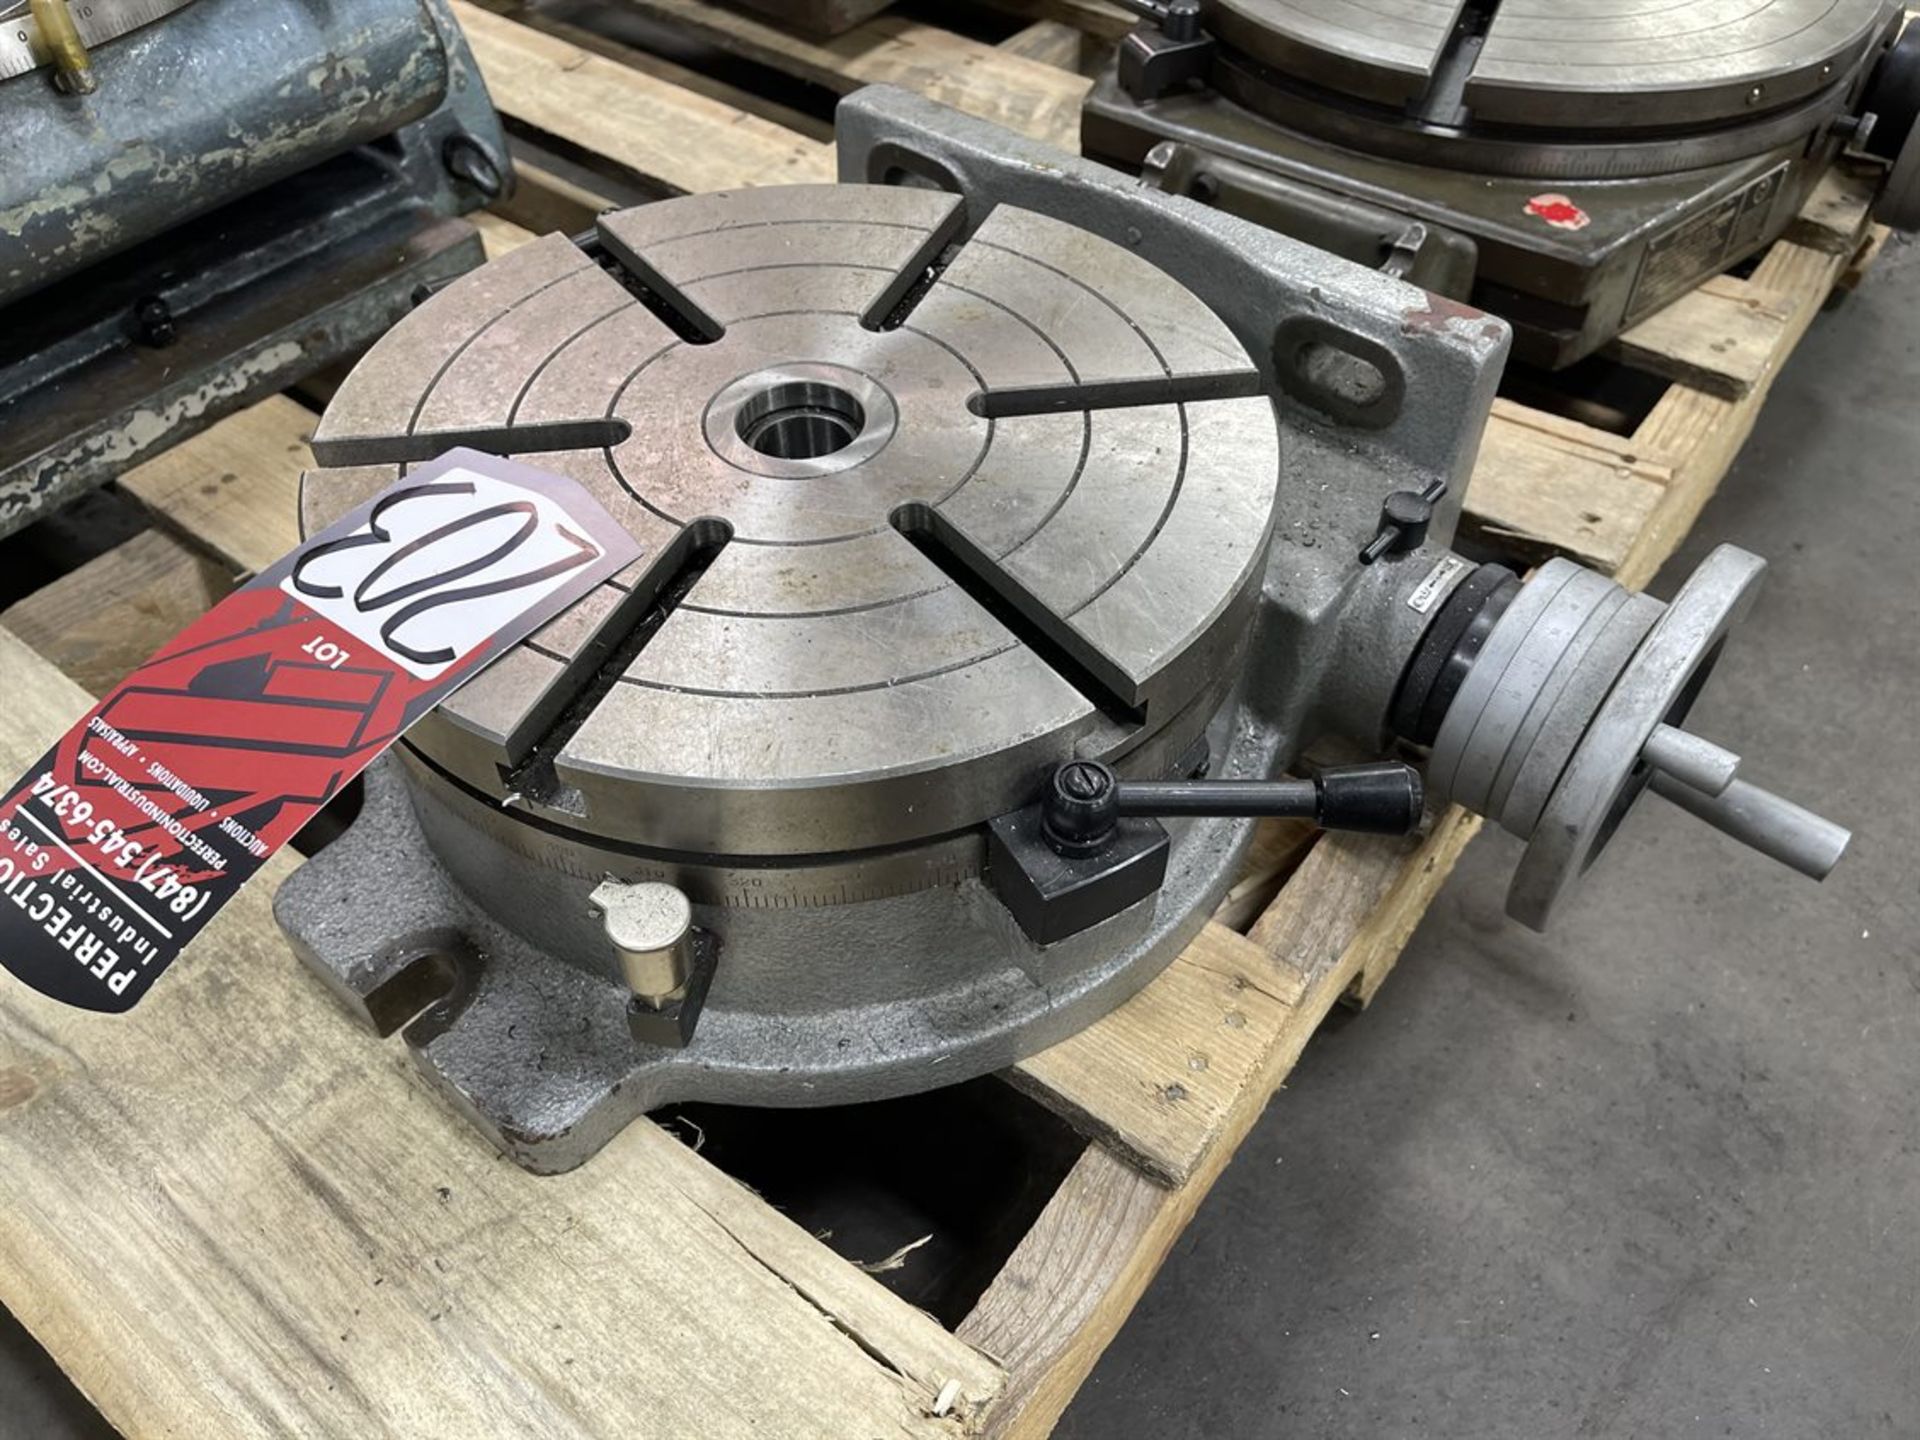 Unknown Make 12" Rotary Table